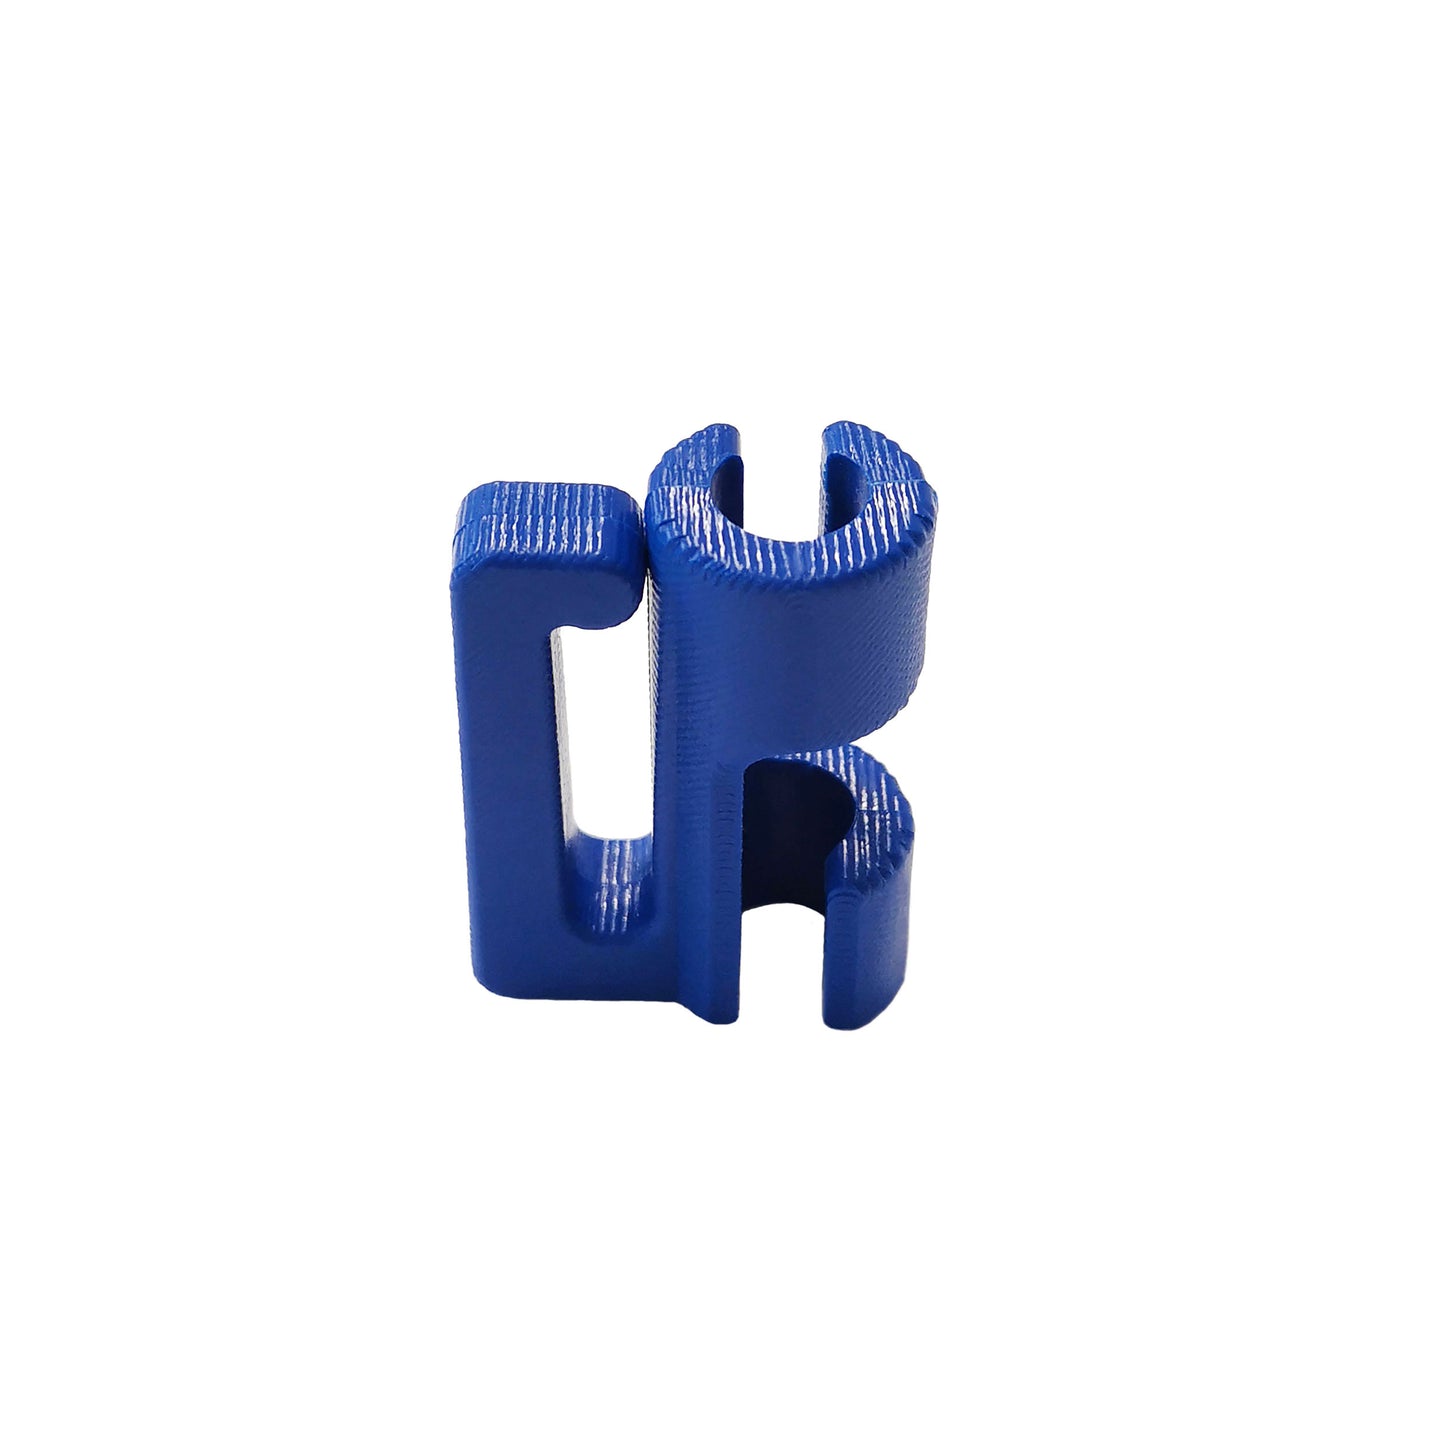 Adjustable clip for wire and tape (D10-12)